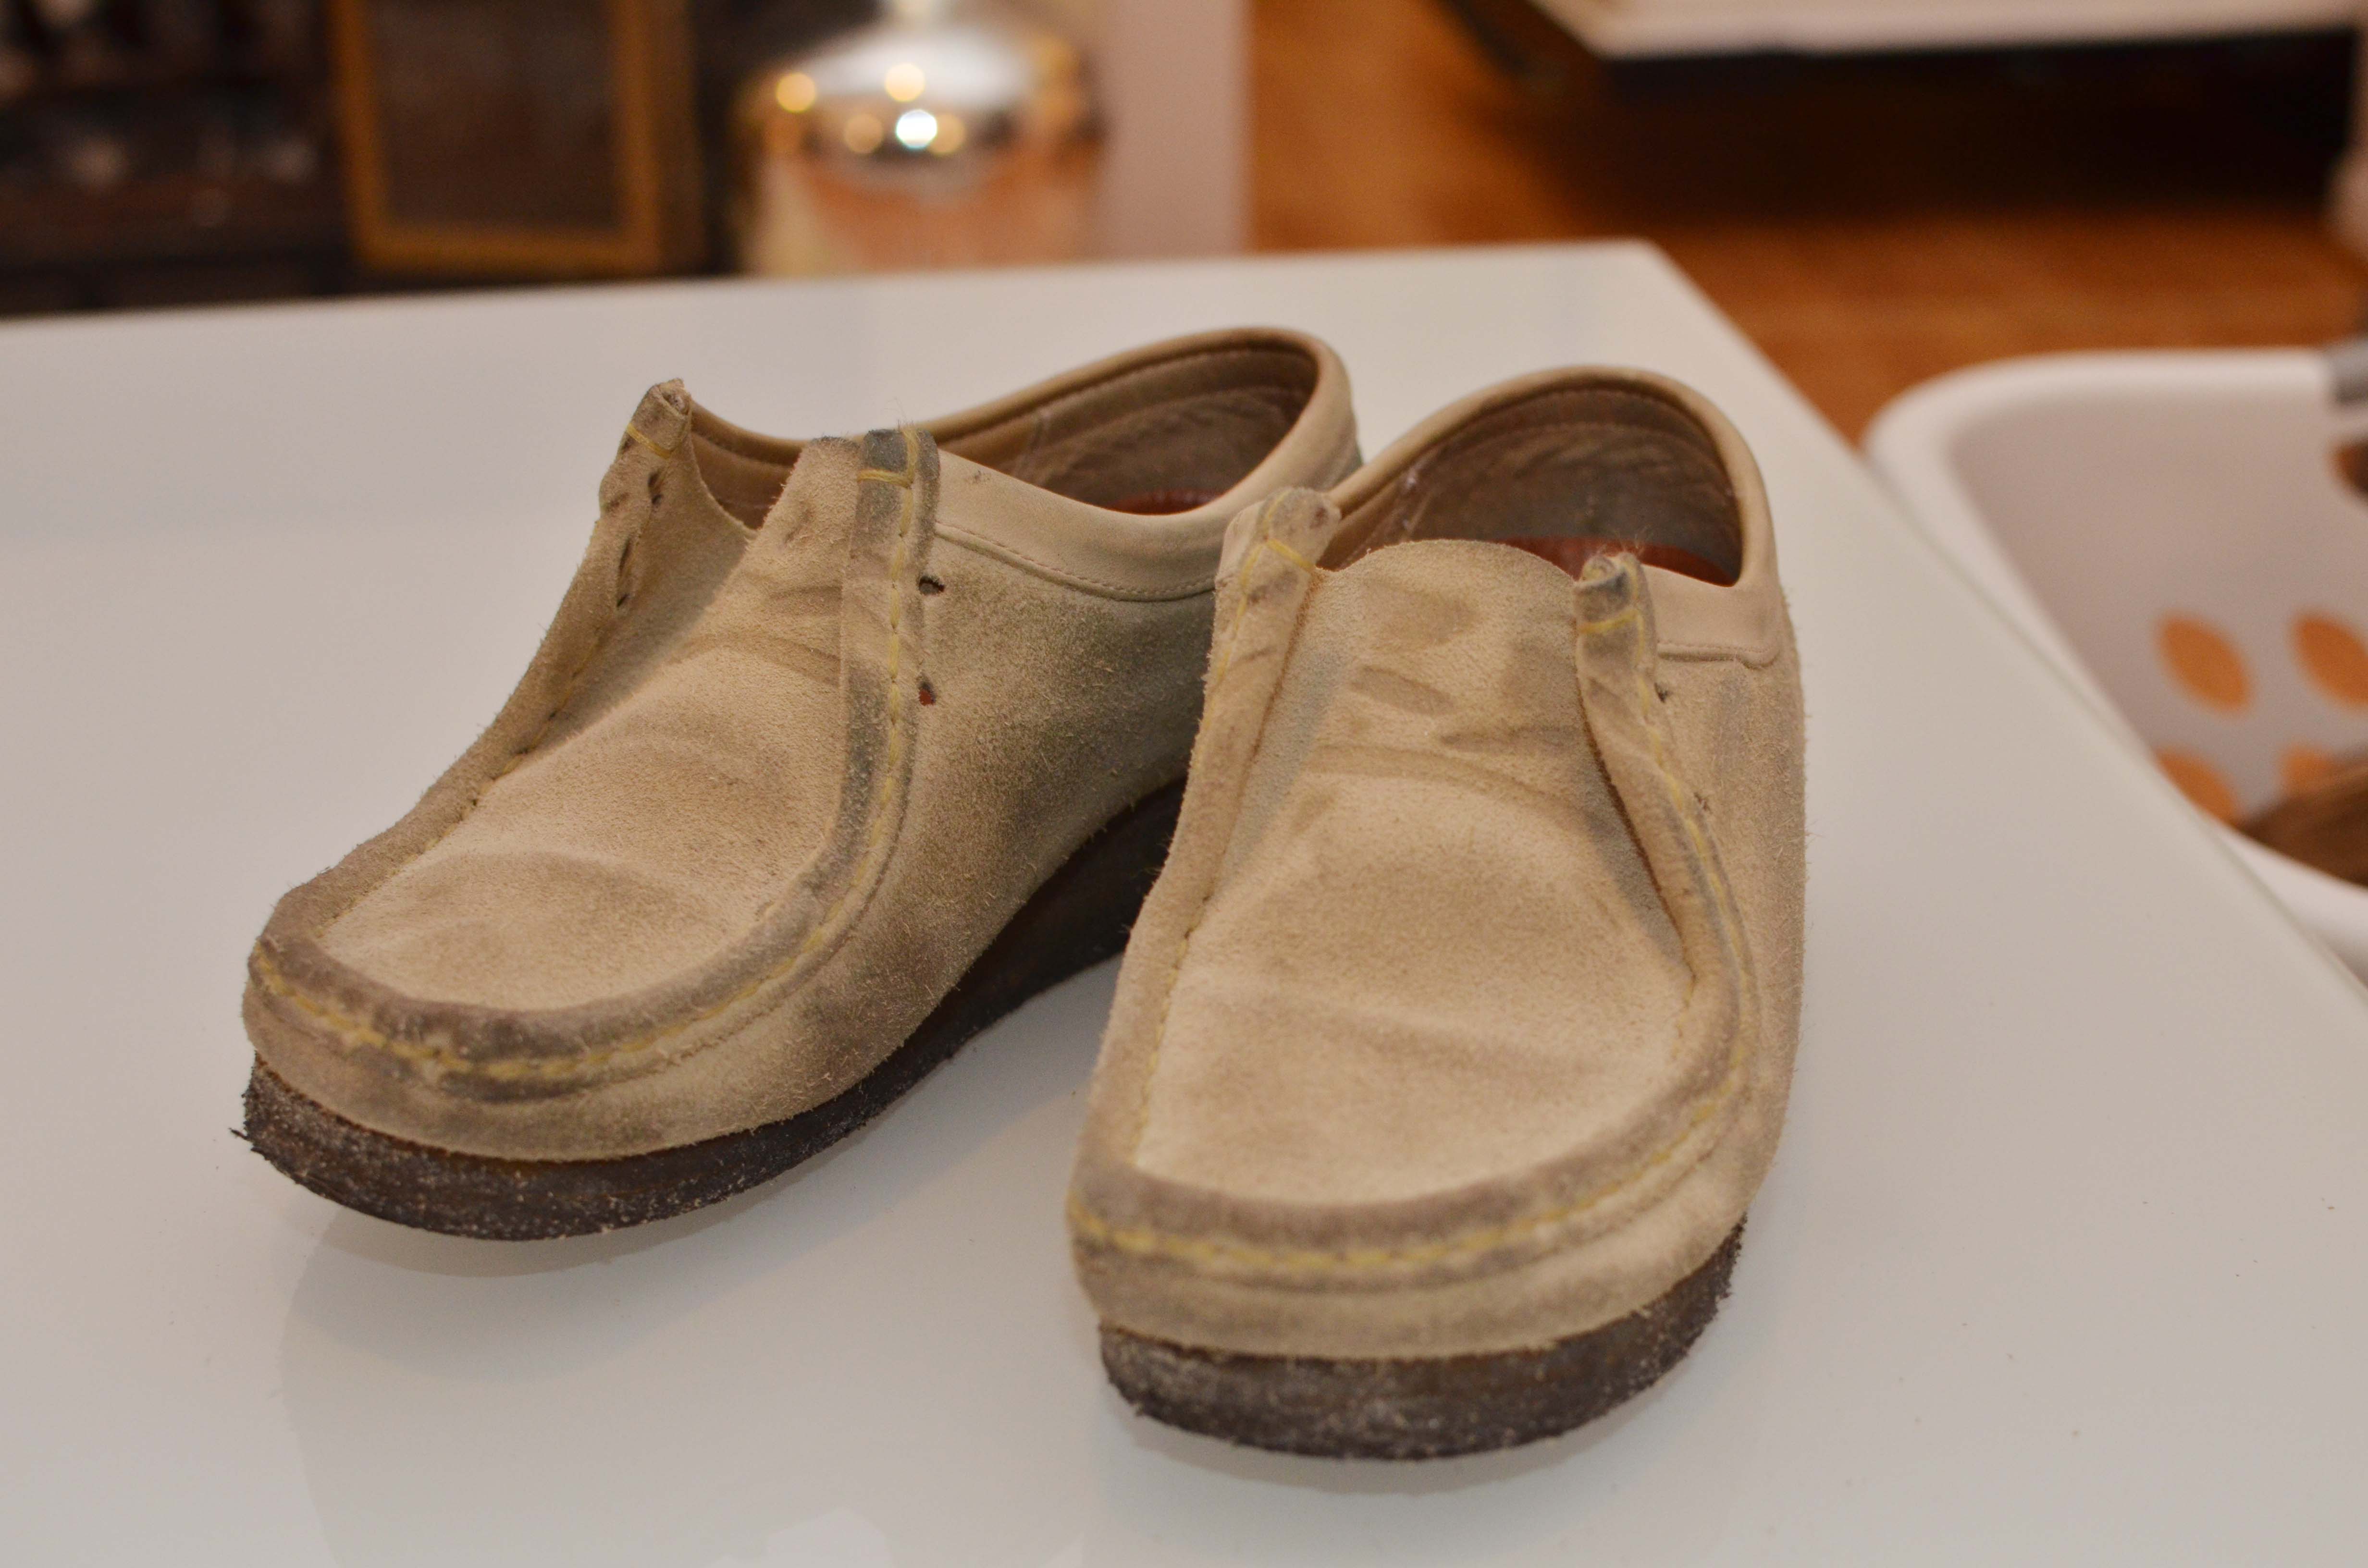 Changing the colour of suede shoes with Suede Dye